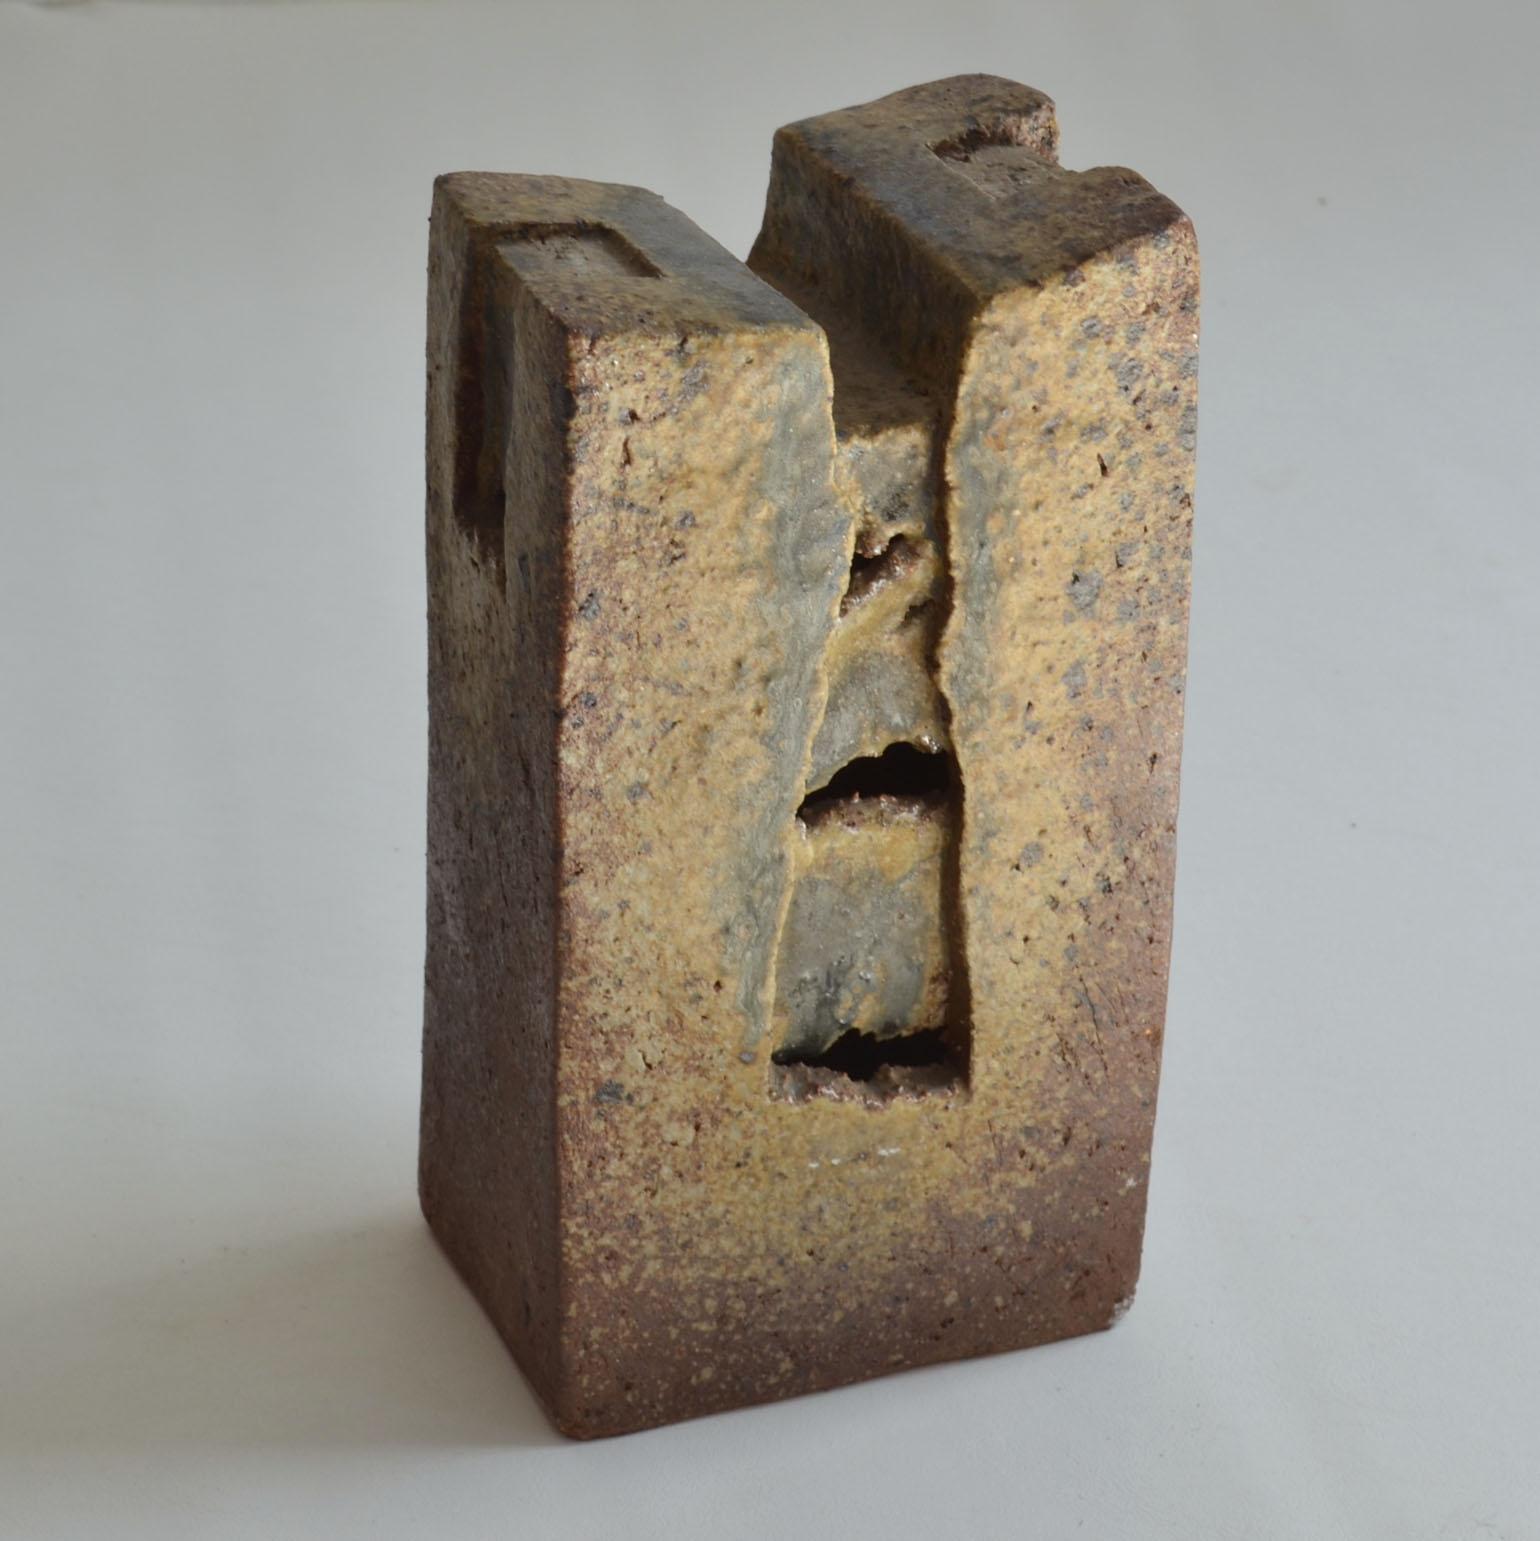 Brutalist architectural abstract ceramic hand formed sculpture in Earth Tones.